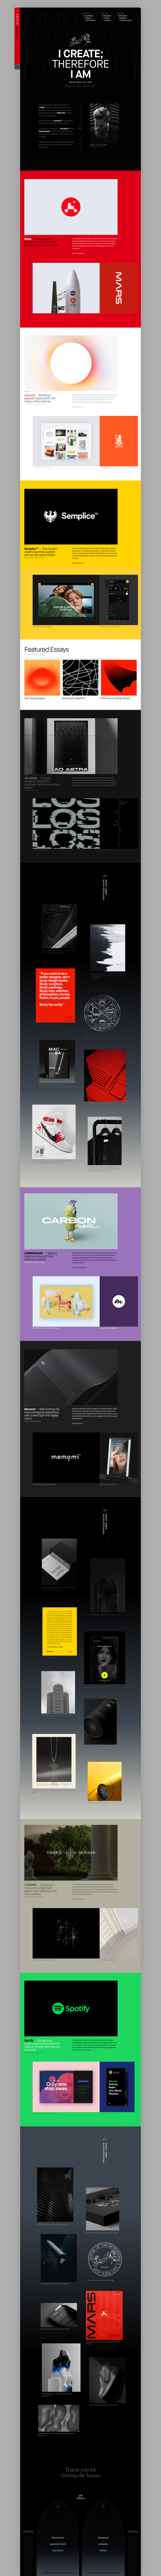 Tobias van Schneider Landing Page Example: I create, therefore I am. I'm Tobias van Schneider a designer born in Germany, raised in Austria & currently living and working in New York City.